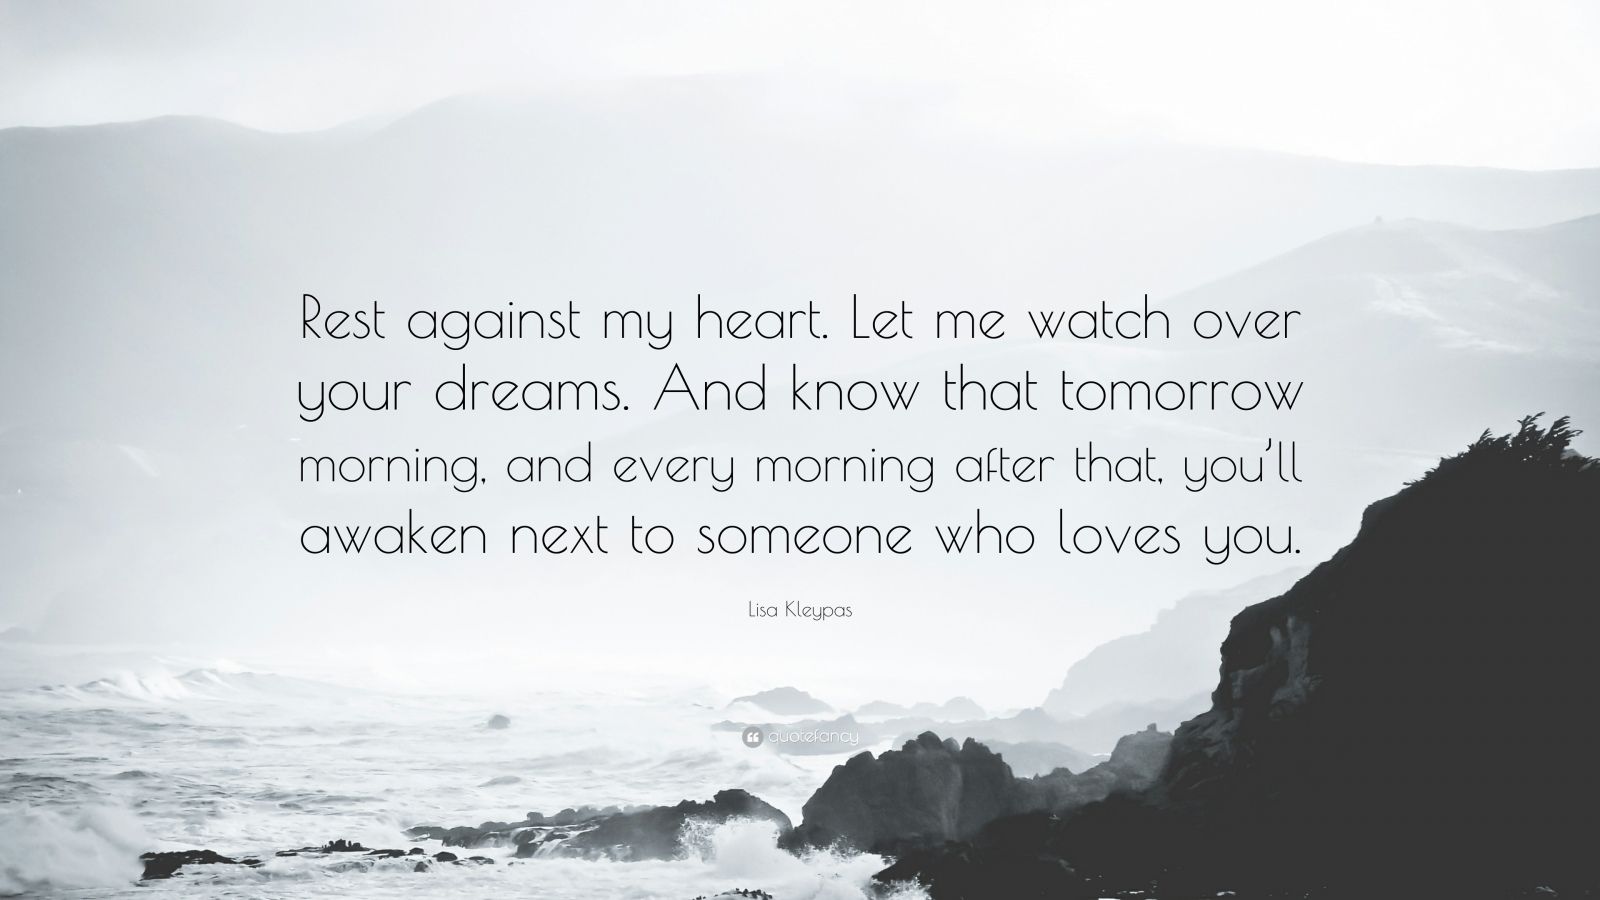 someone to watch over me by lisa kleypas